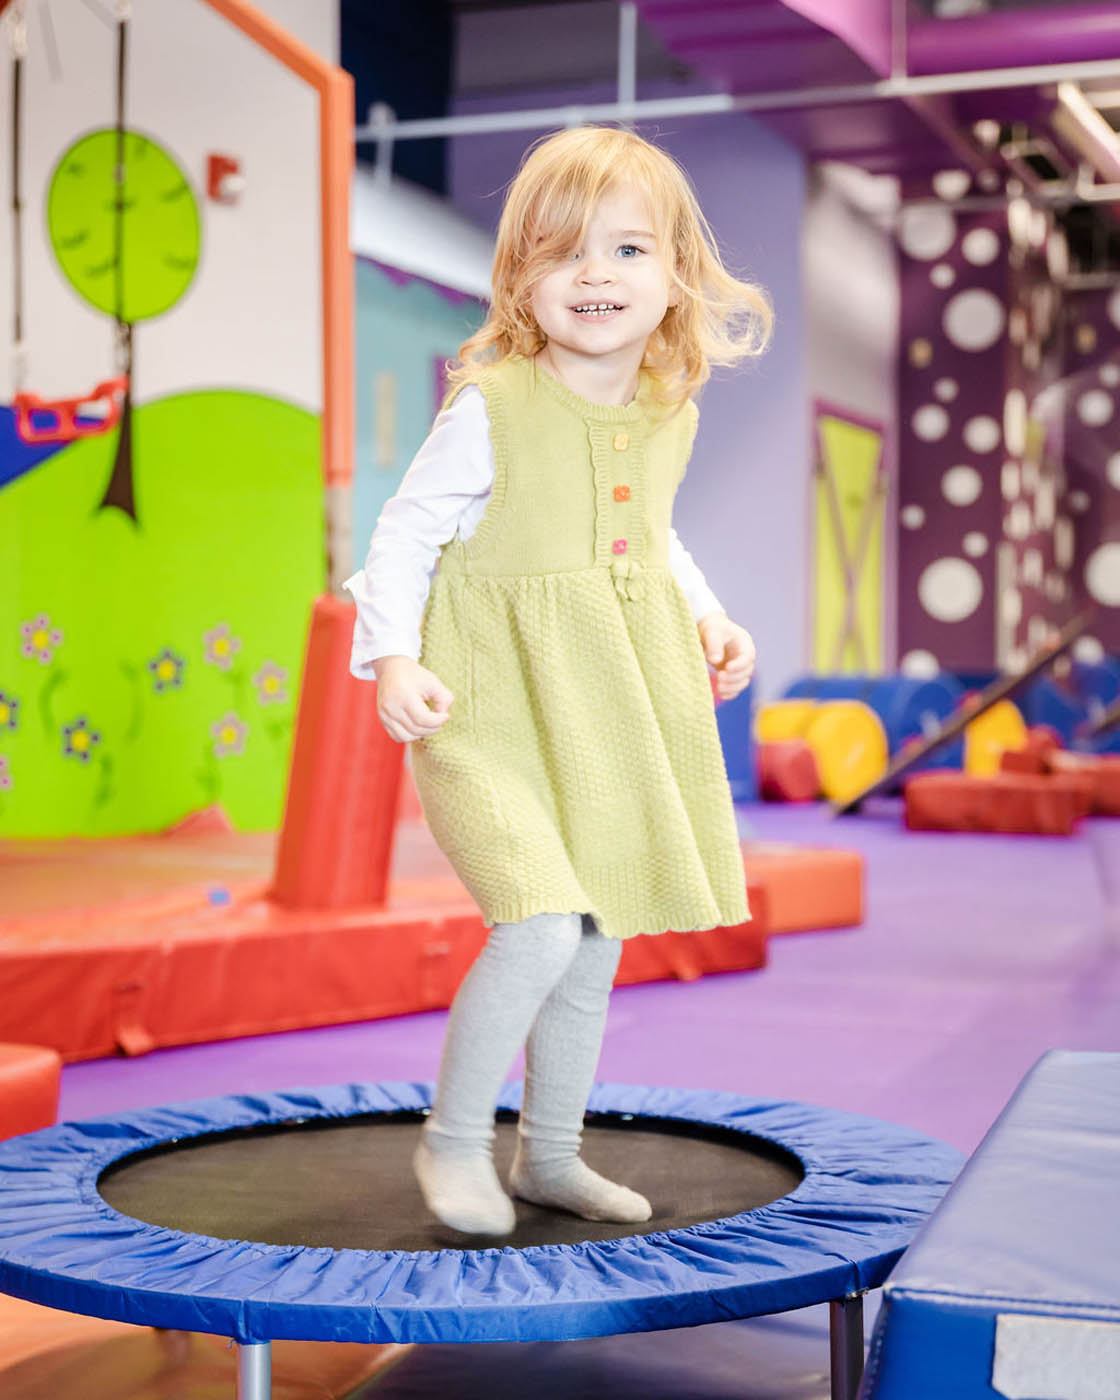 A little girl in a green dress playing on Romp n' Roll's gym equipment, contact us today for indoor kids activities in Willow Grove, PA.